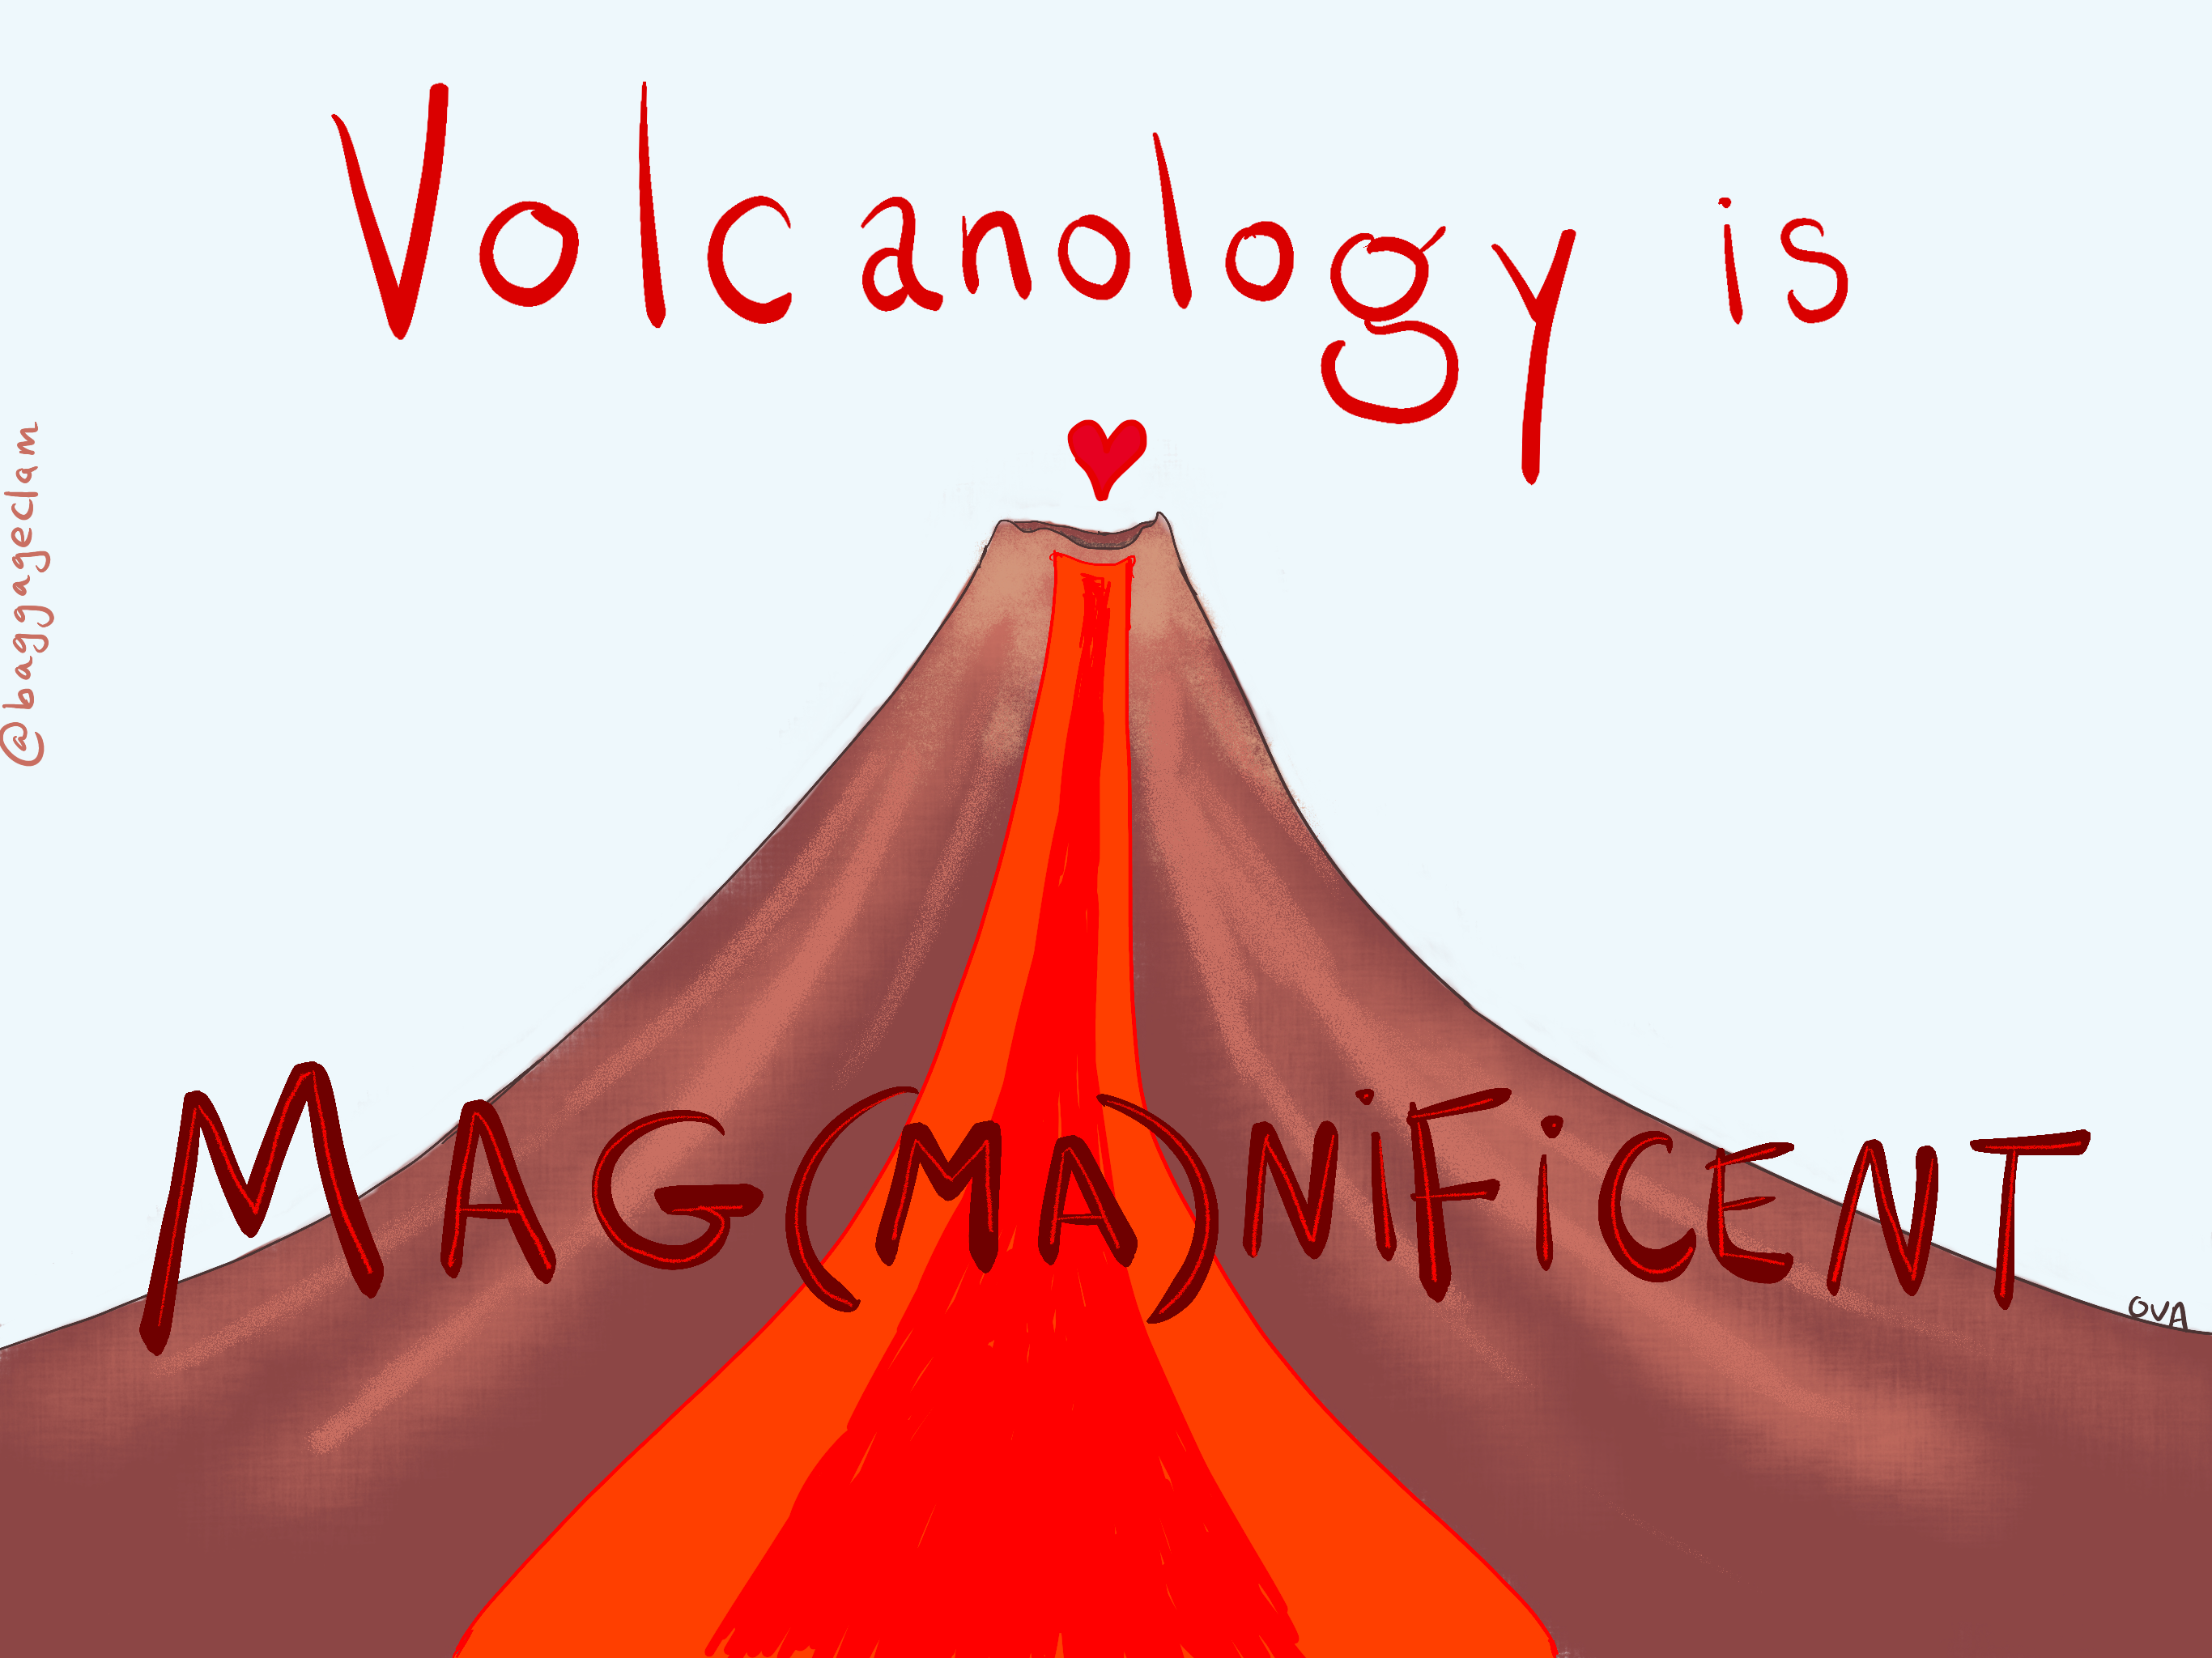 Volcanology - Magmanificent